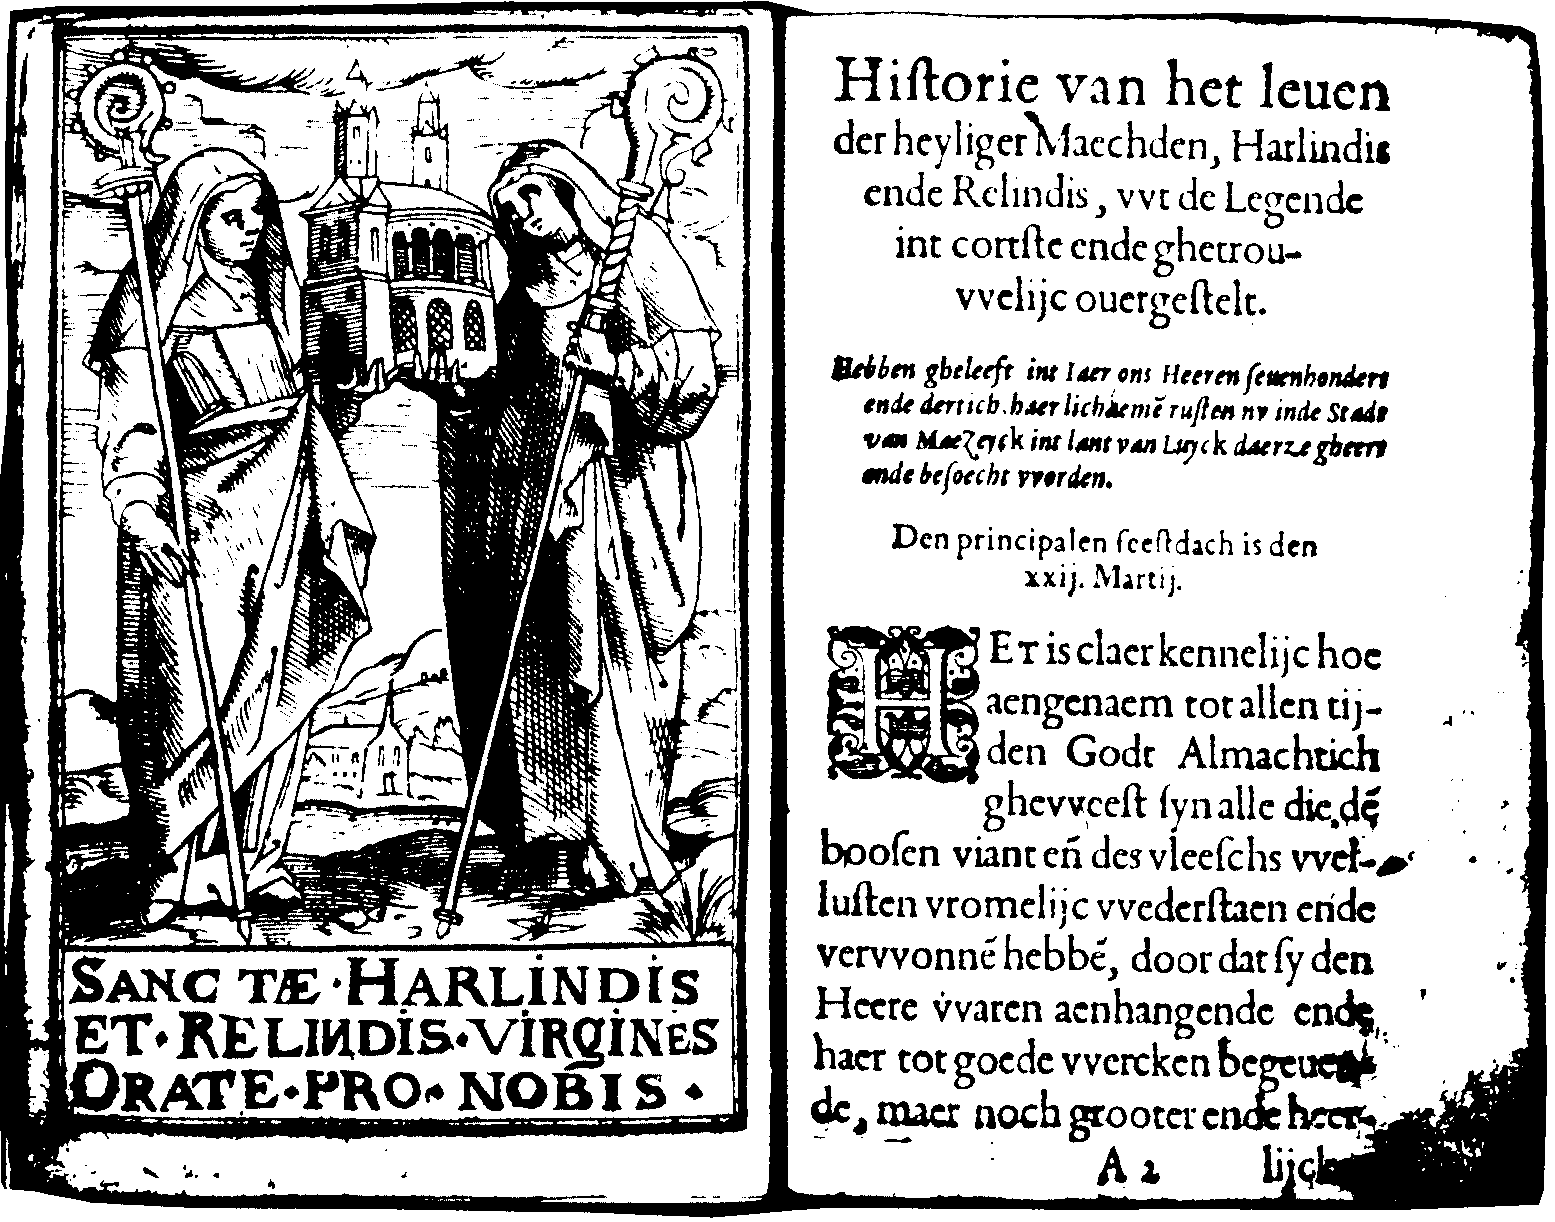 Titel page of 1596 book on the Saints Harlindis and Relindis.